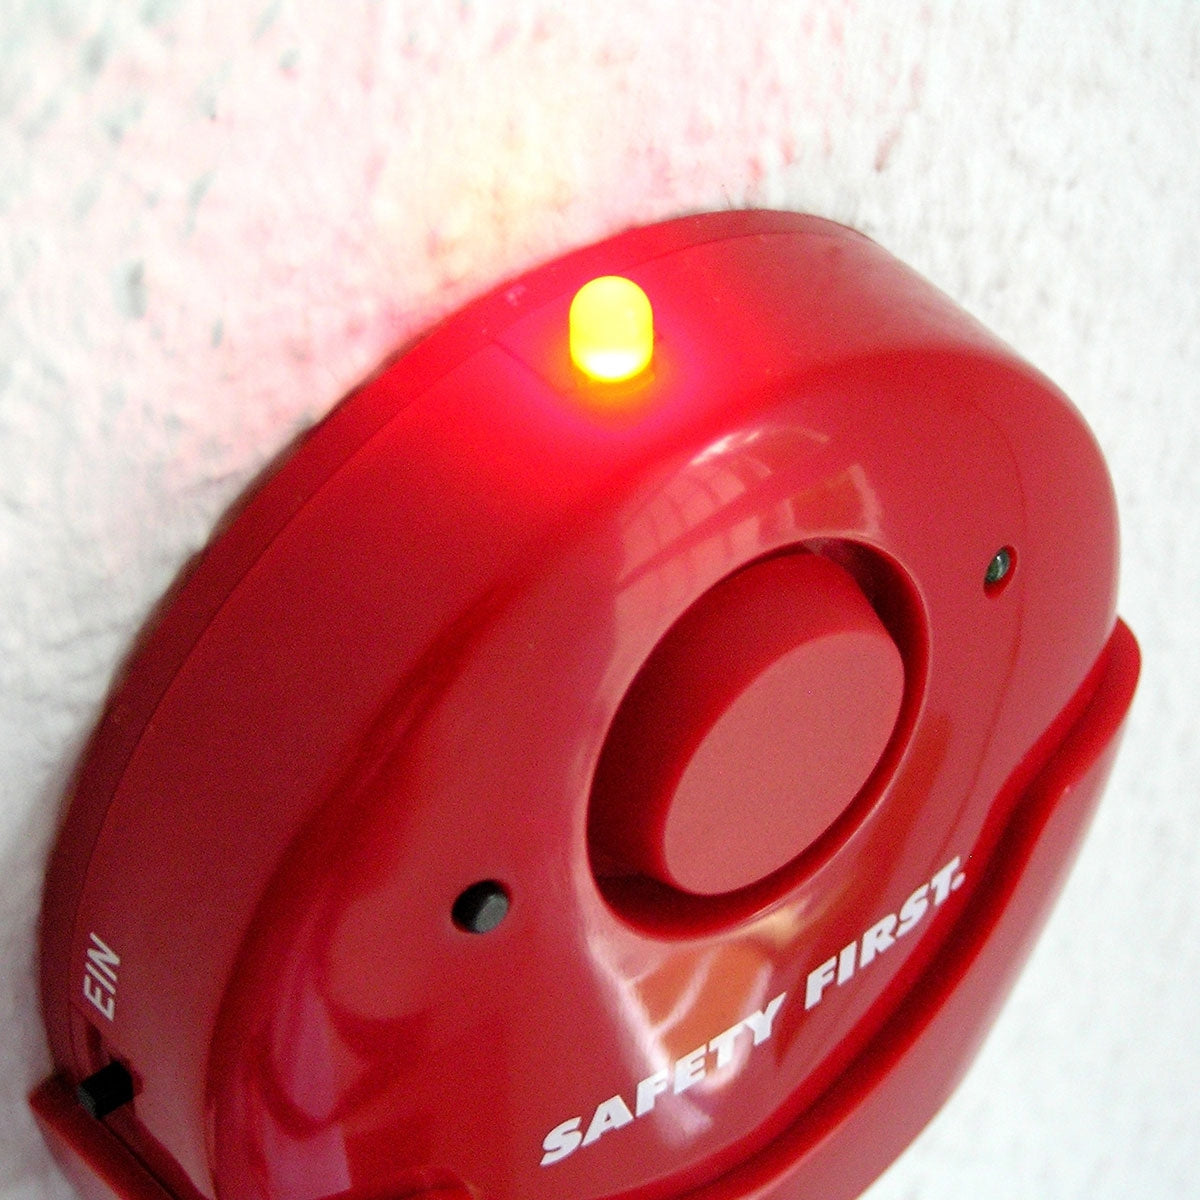 Emergency alarm with LED light to protect your home